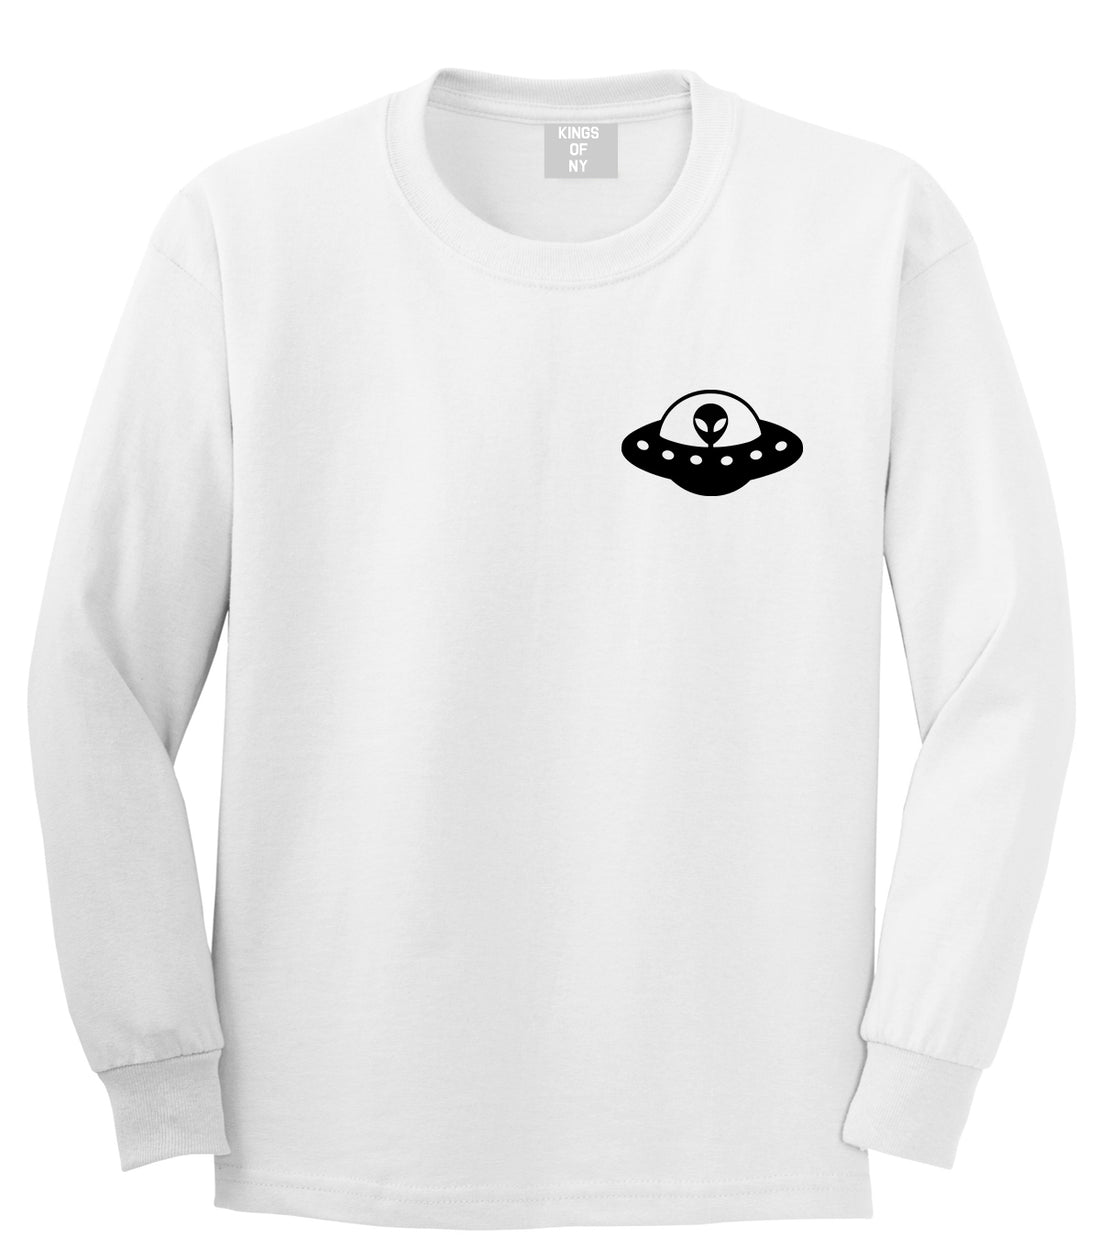 Alien Spaceship Chest Mens White Long Sleeve T-Shirt by Kings Of NY